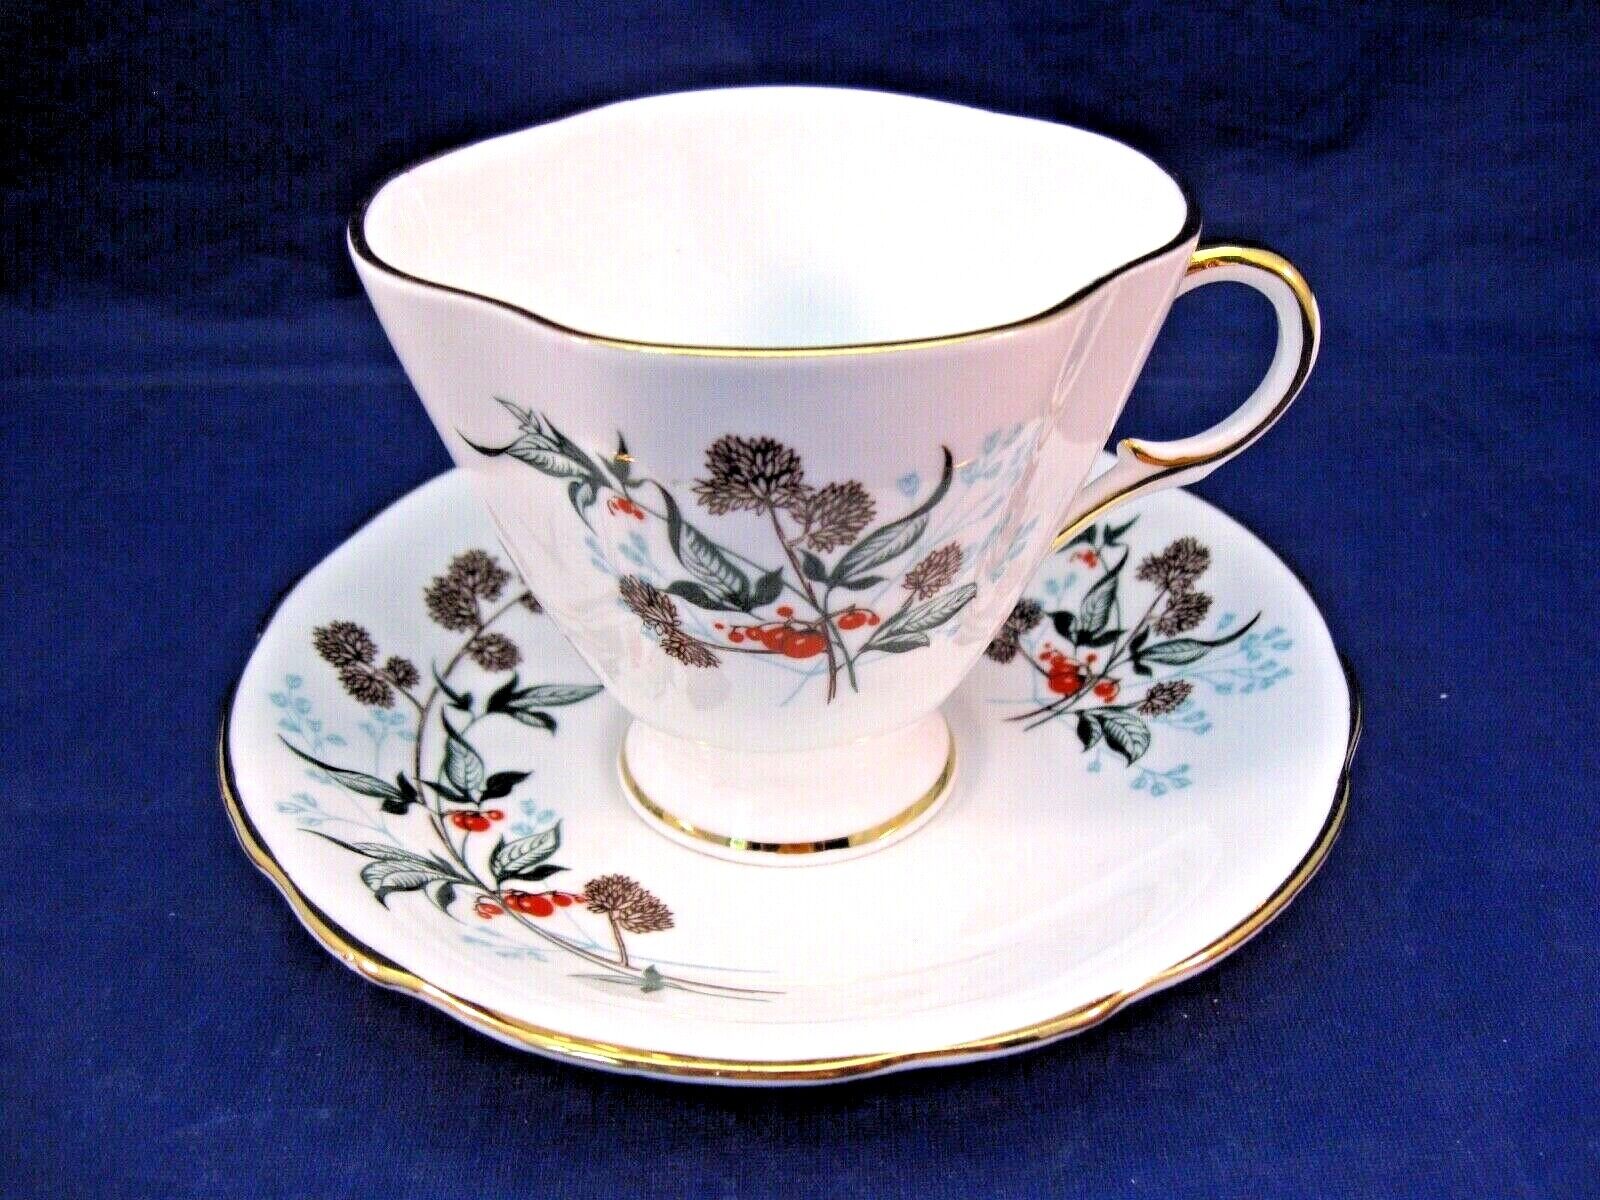 ANTIQUE CLARANCE TEA CUP AND SAUCER - SIMPLE FLORAL DECORATION - MADE IN ENGLAND